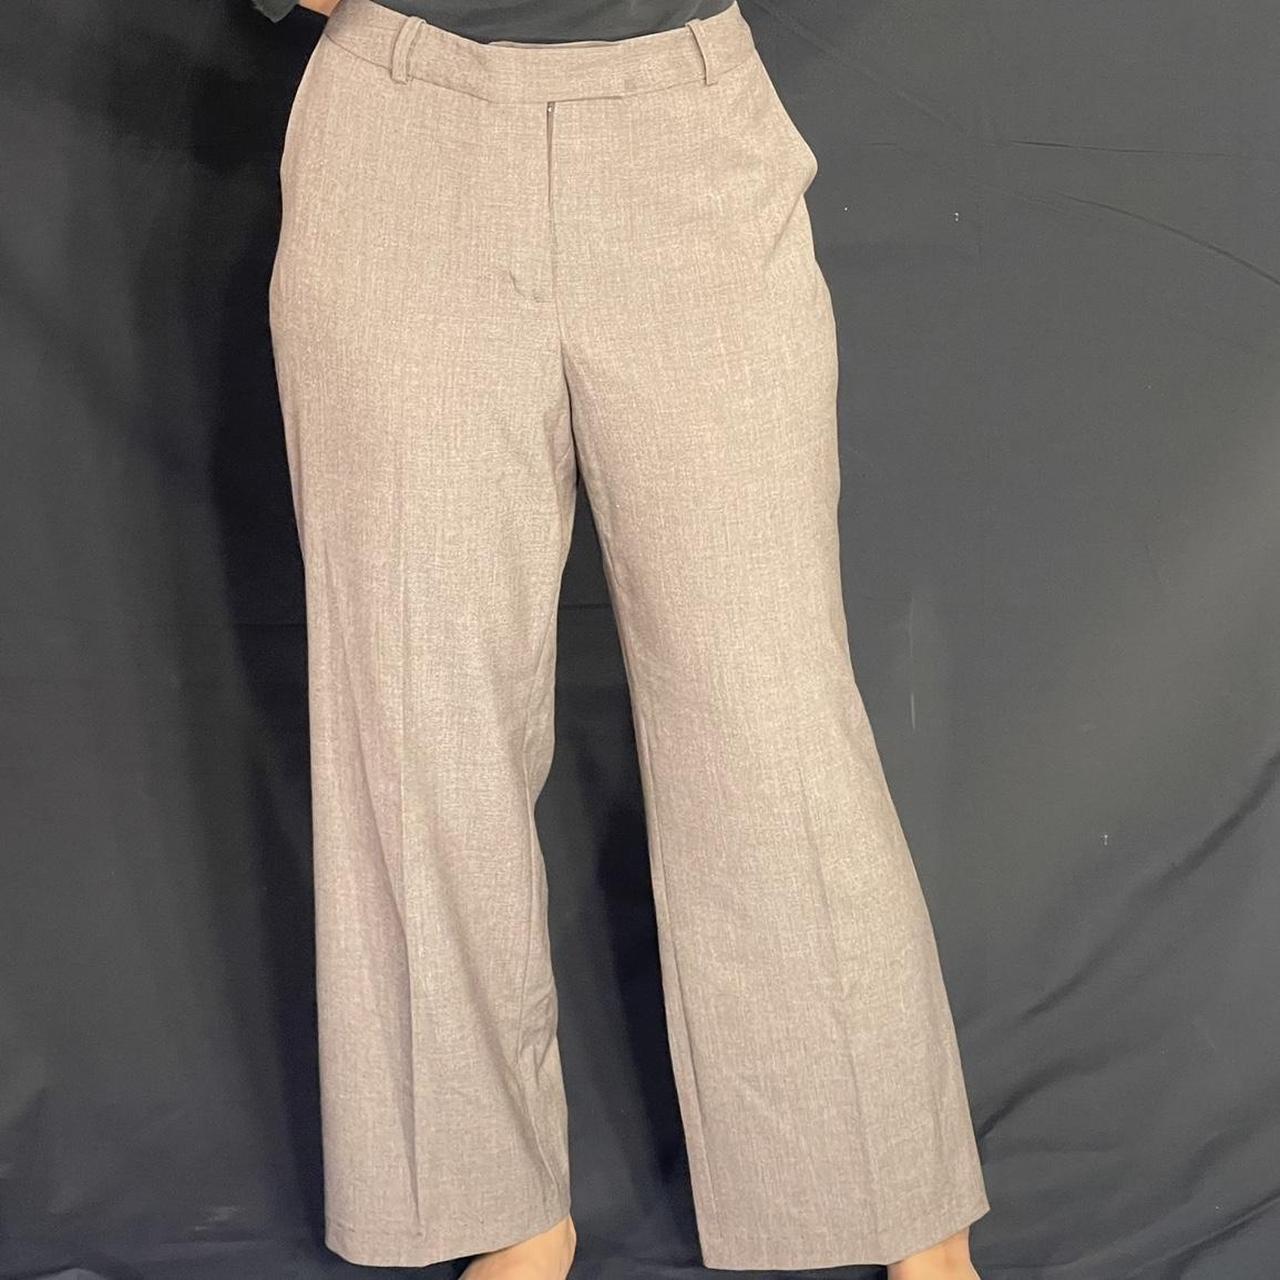 Buy a Calvin Klein Womens Faux Leather Trim Casual Trouser Pants |  Tagsweekly